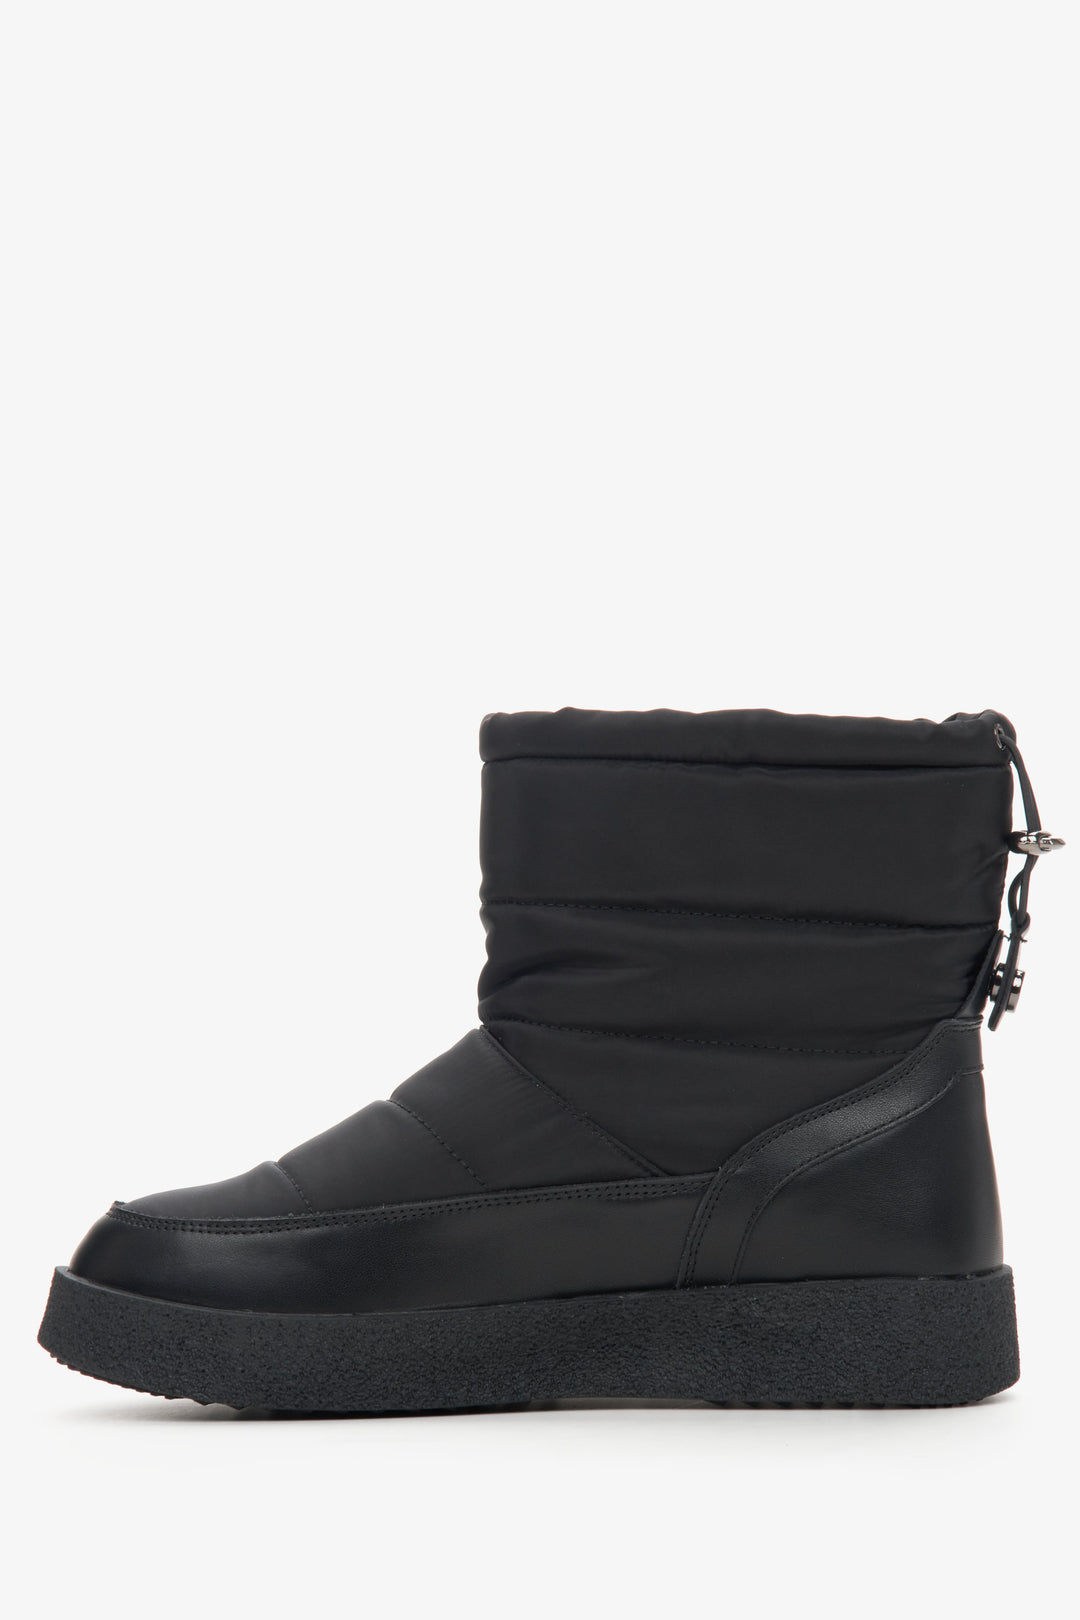 Women's leather, black snow boots by Estro - side view of the shoe.